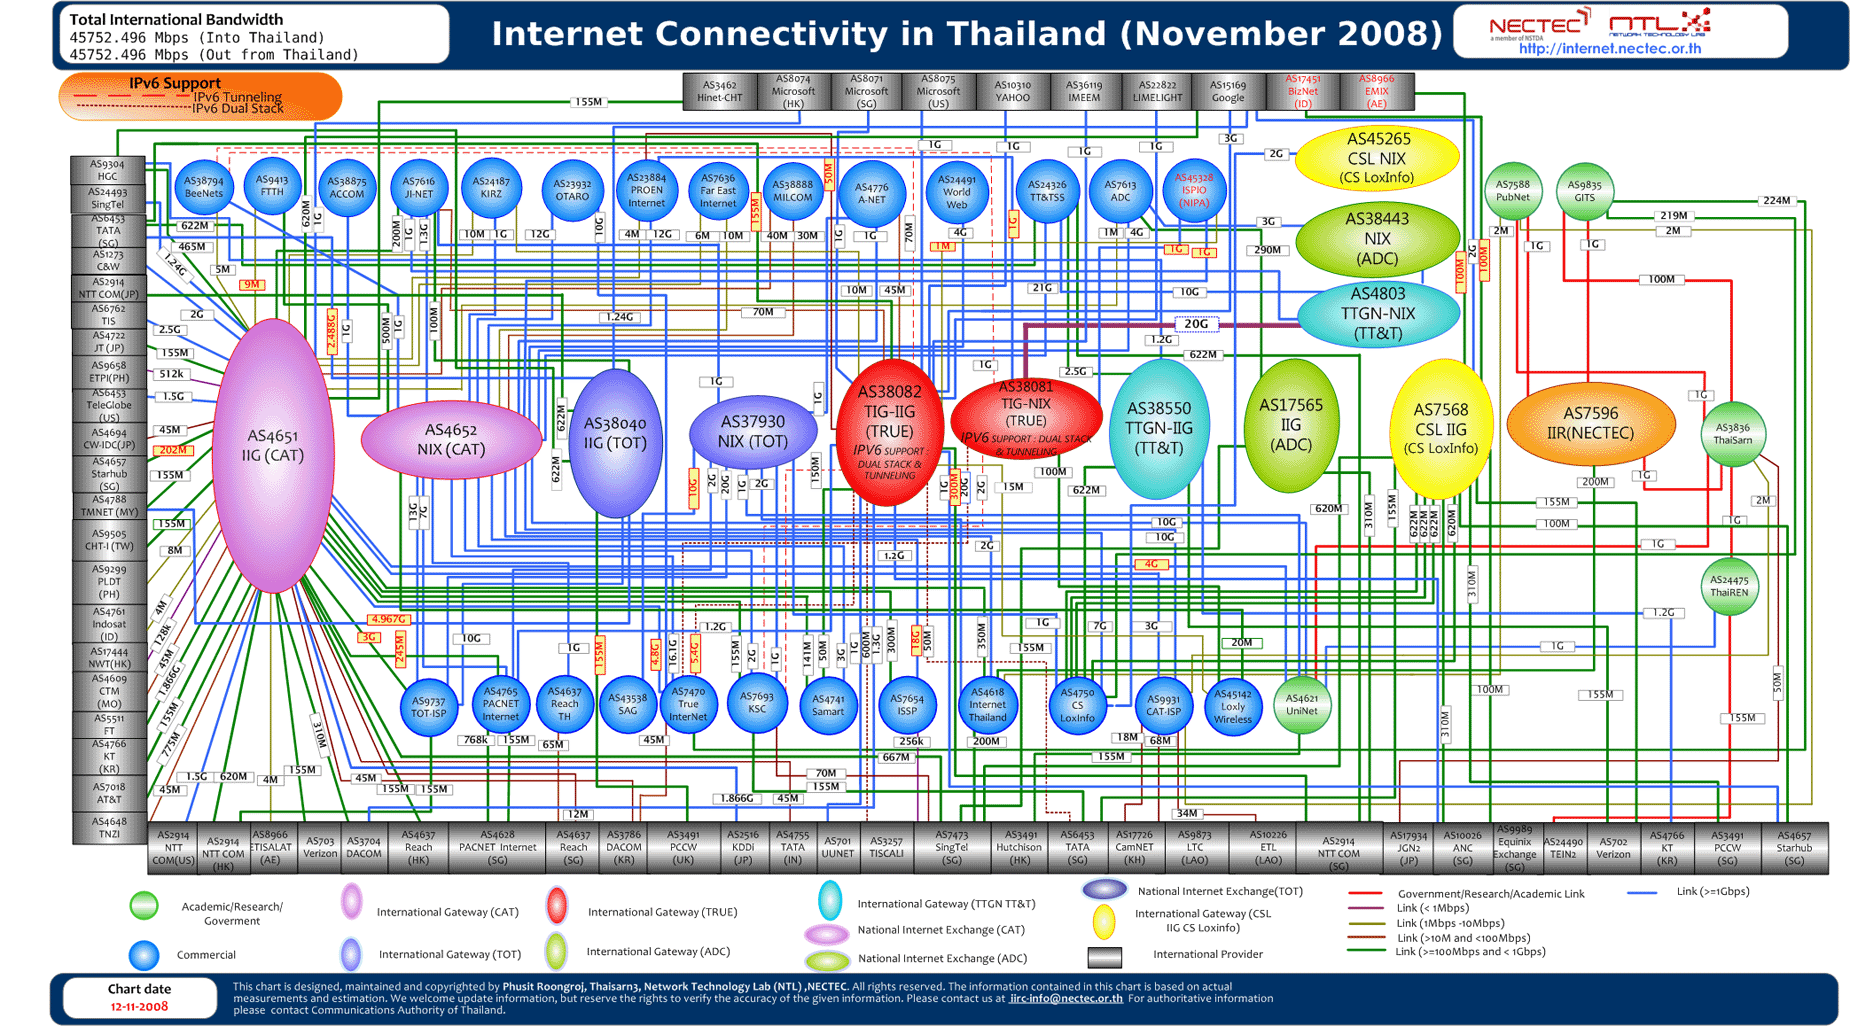 Internet Connection Map - from NECTEC